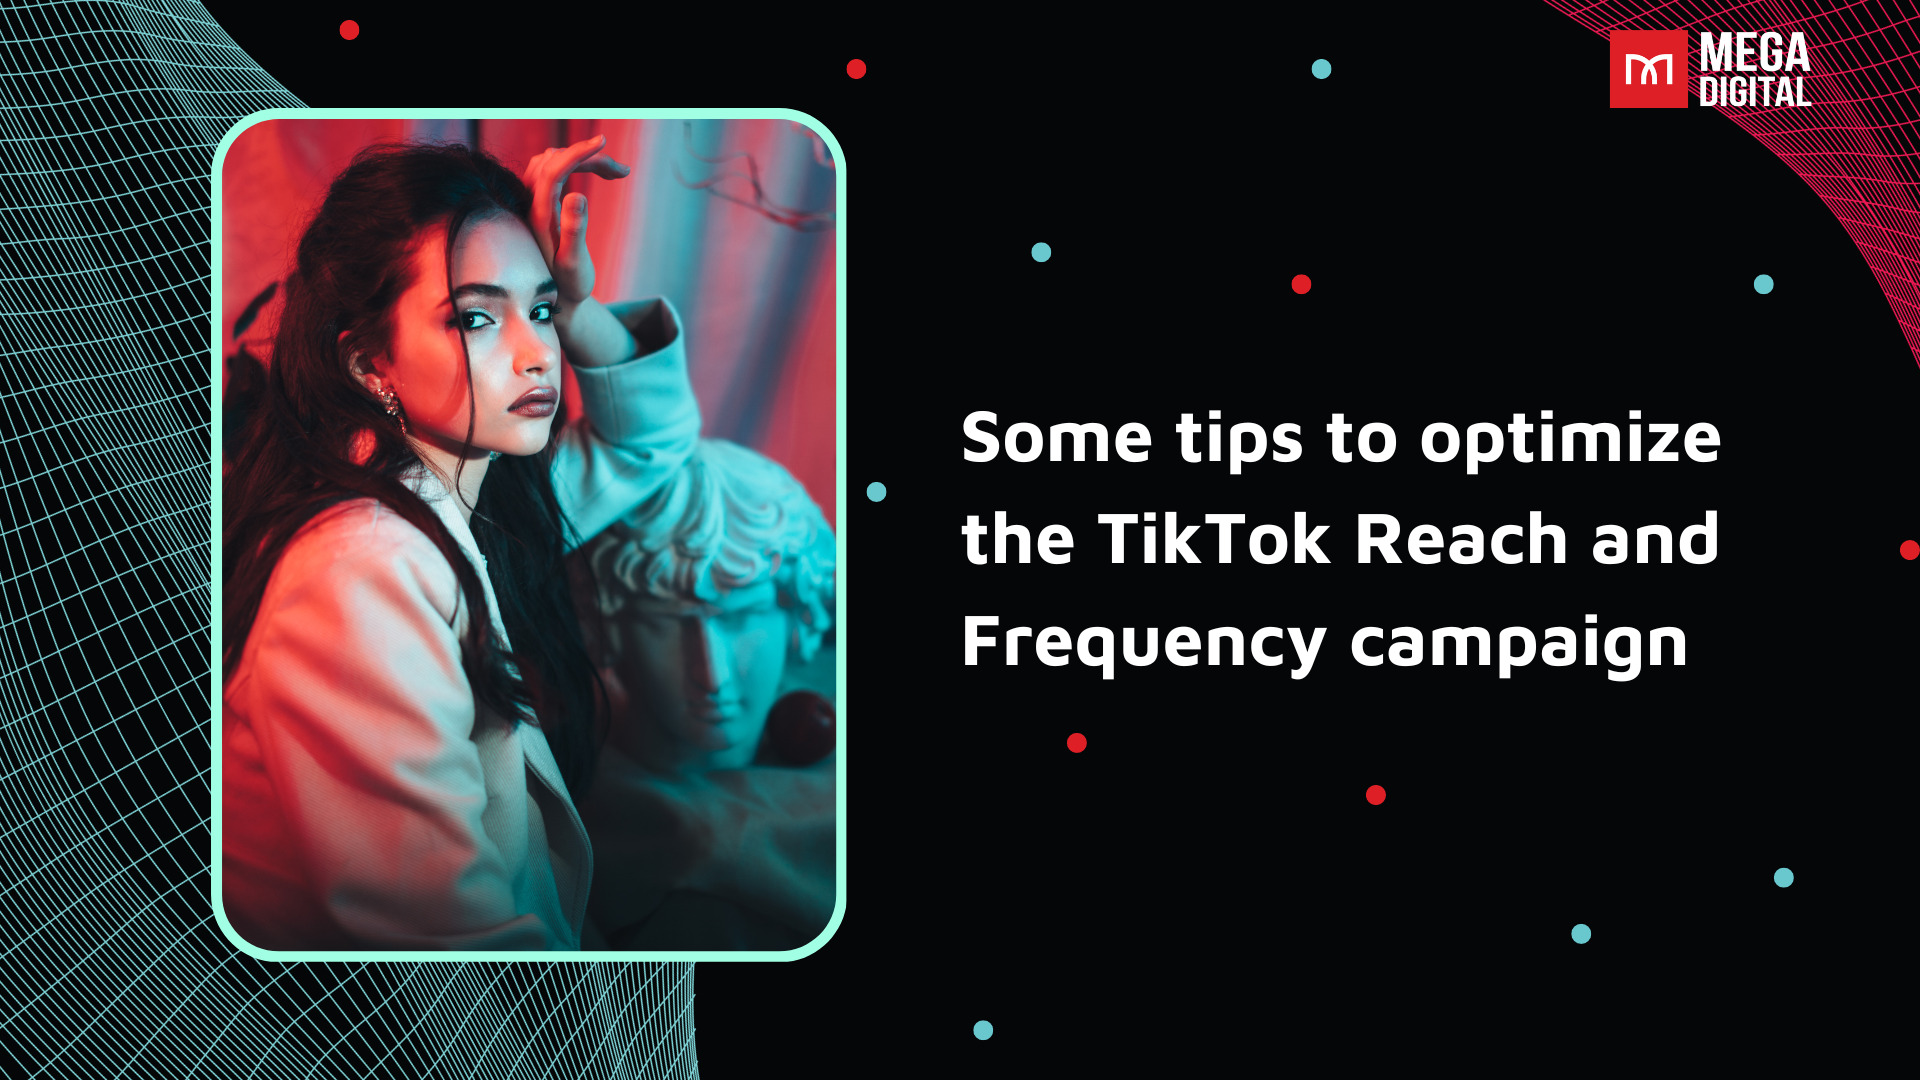 Some tips to optimize the TikTok Reach and Frequency campaign